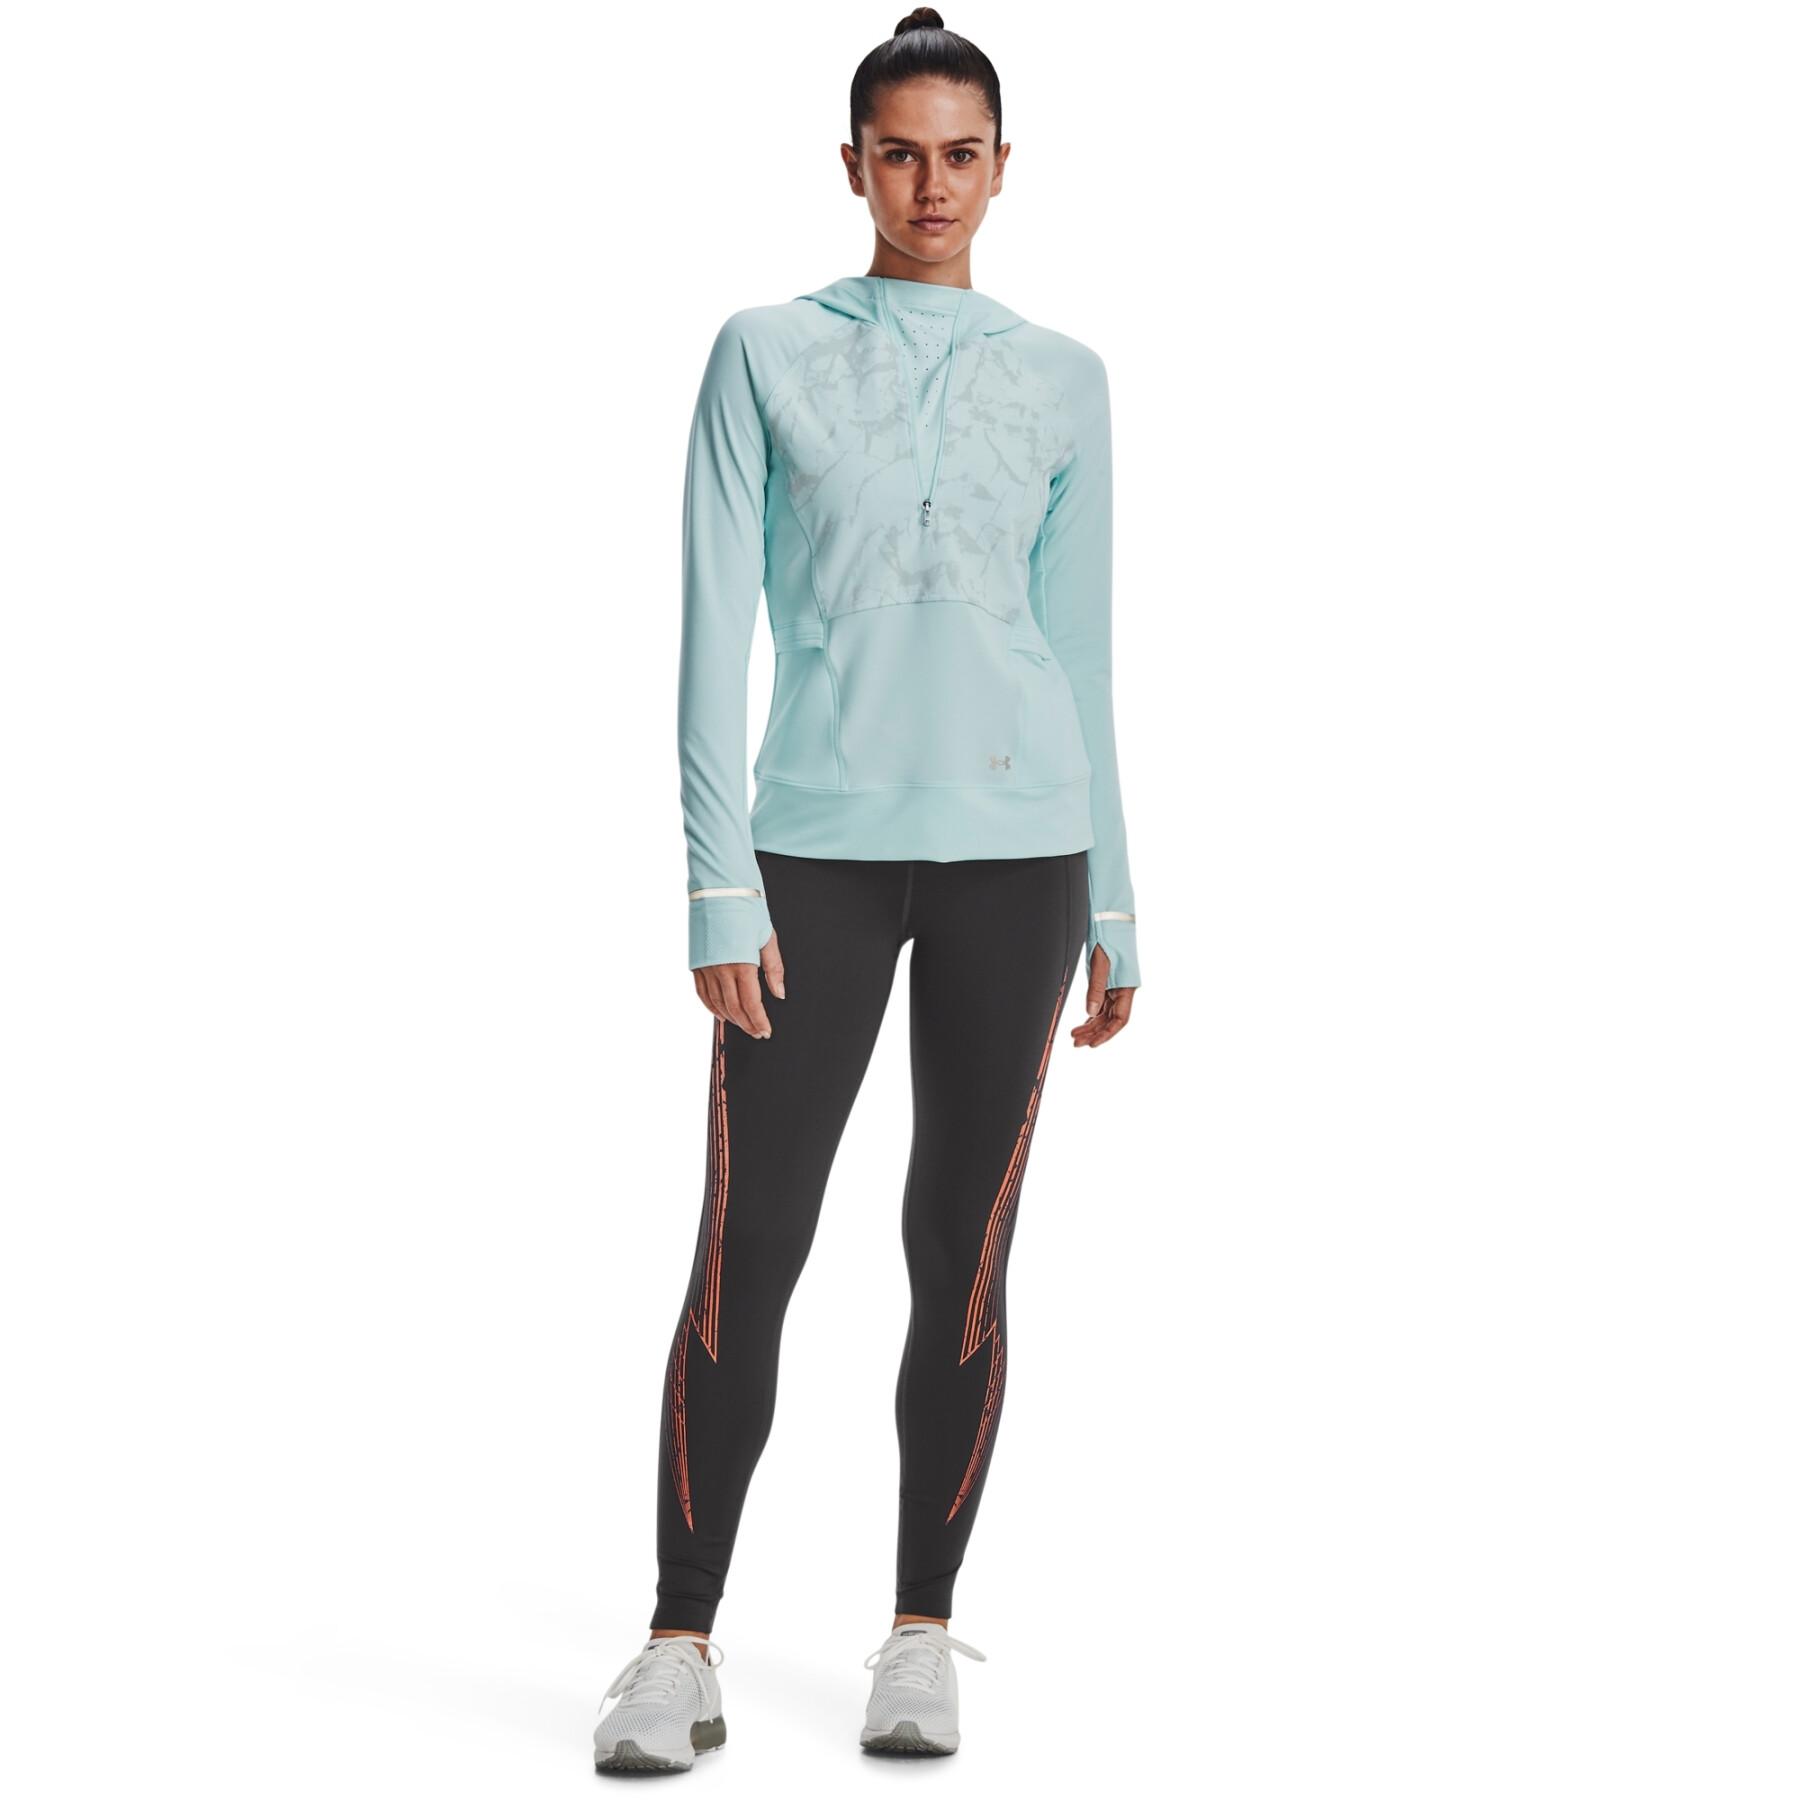 Women's 1/2 zip hoodie Under Armour Outrun the cold